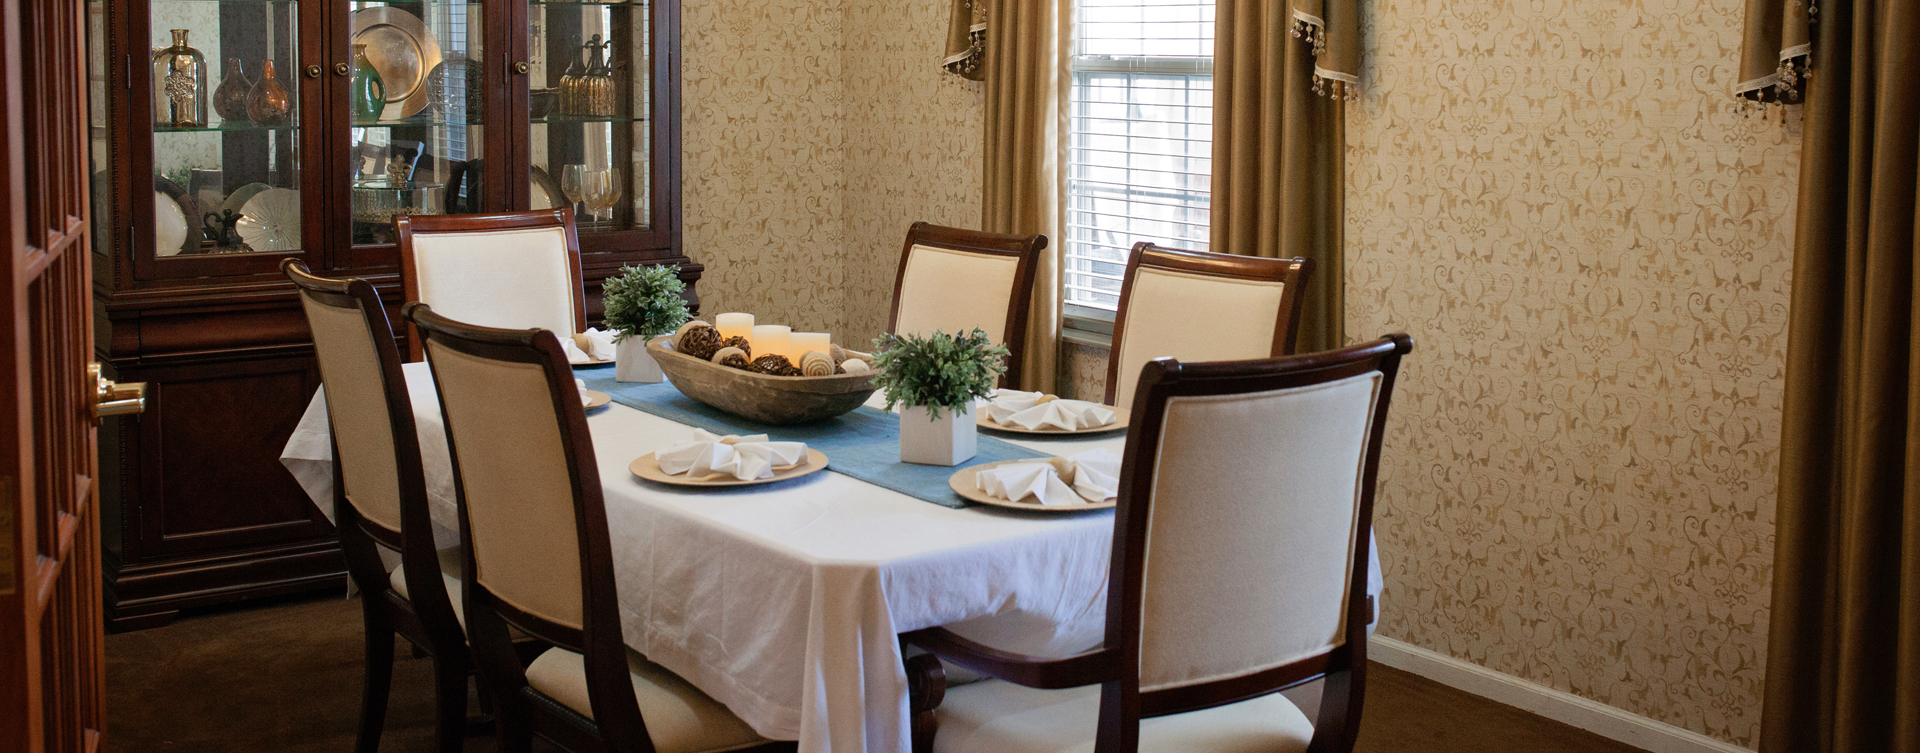 Food is best when shared with family and friends in the private dining room at Bickford of Marion